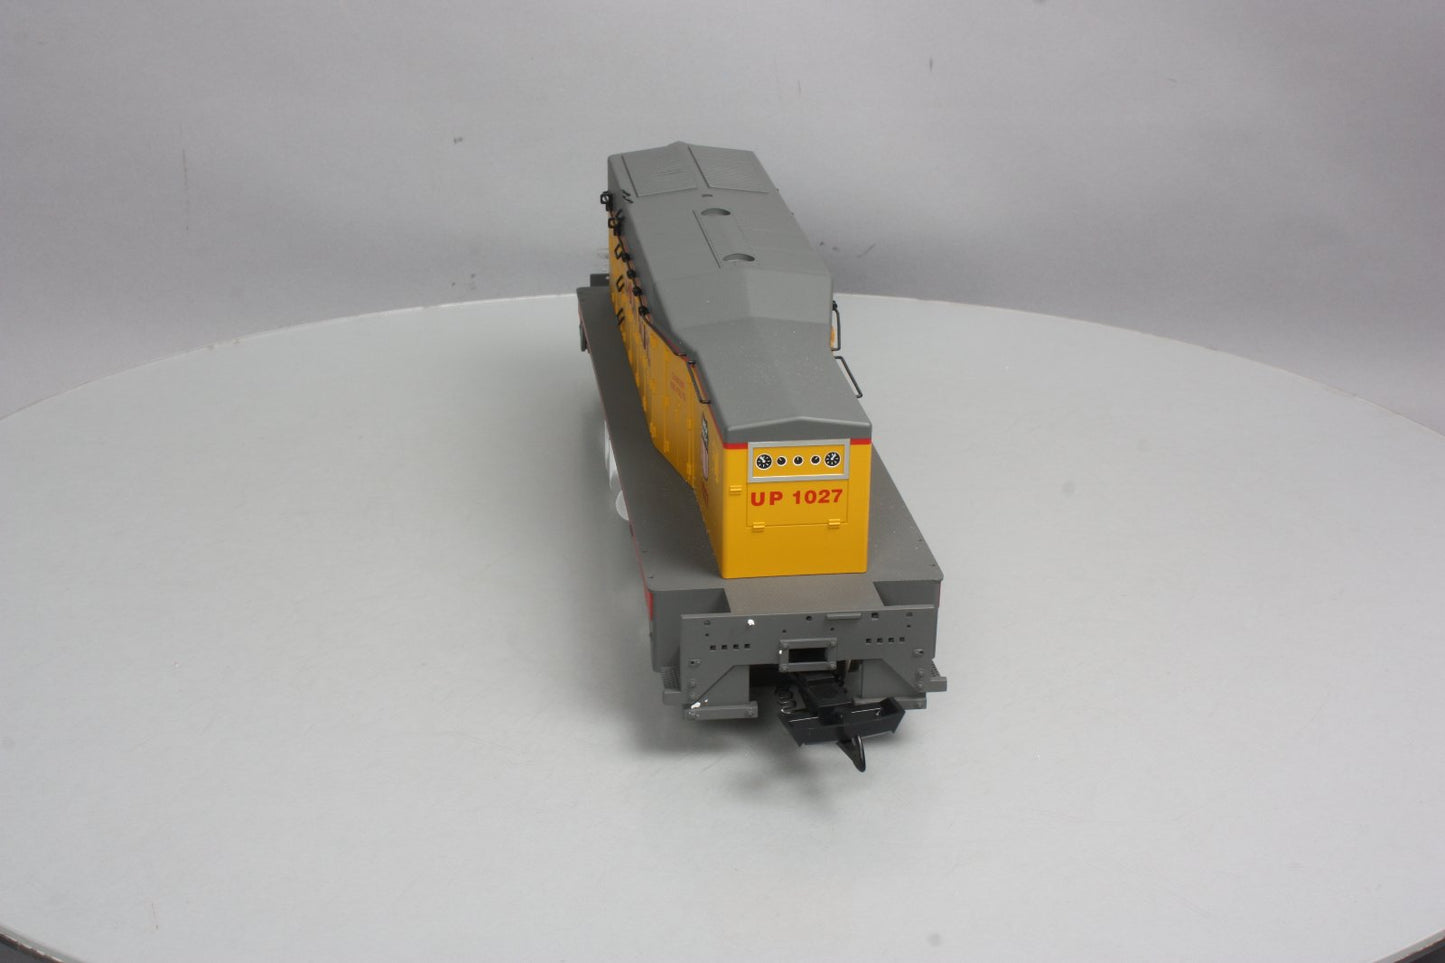 USA Trains 22008 G Scale Union Pacific nW-2 Powered Calf Diesel Locomotive